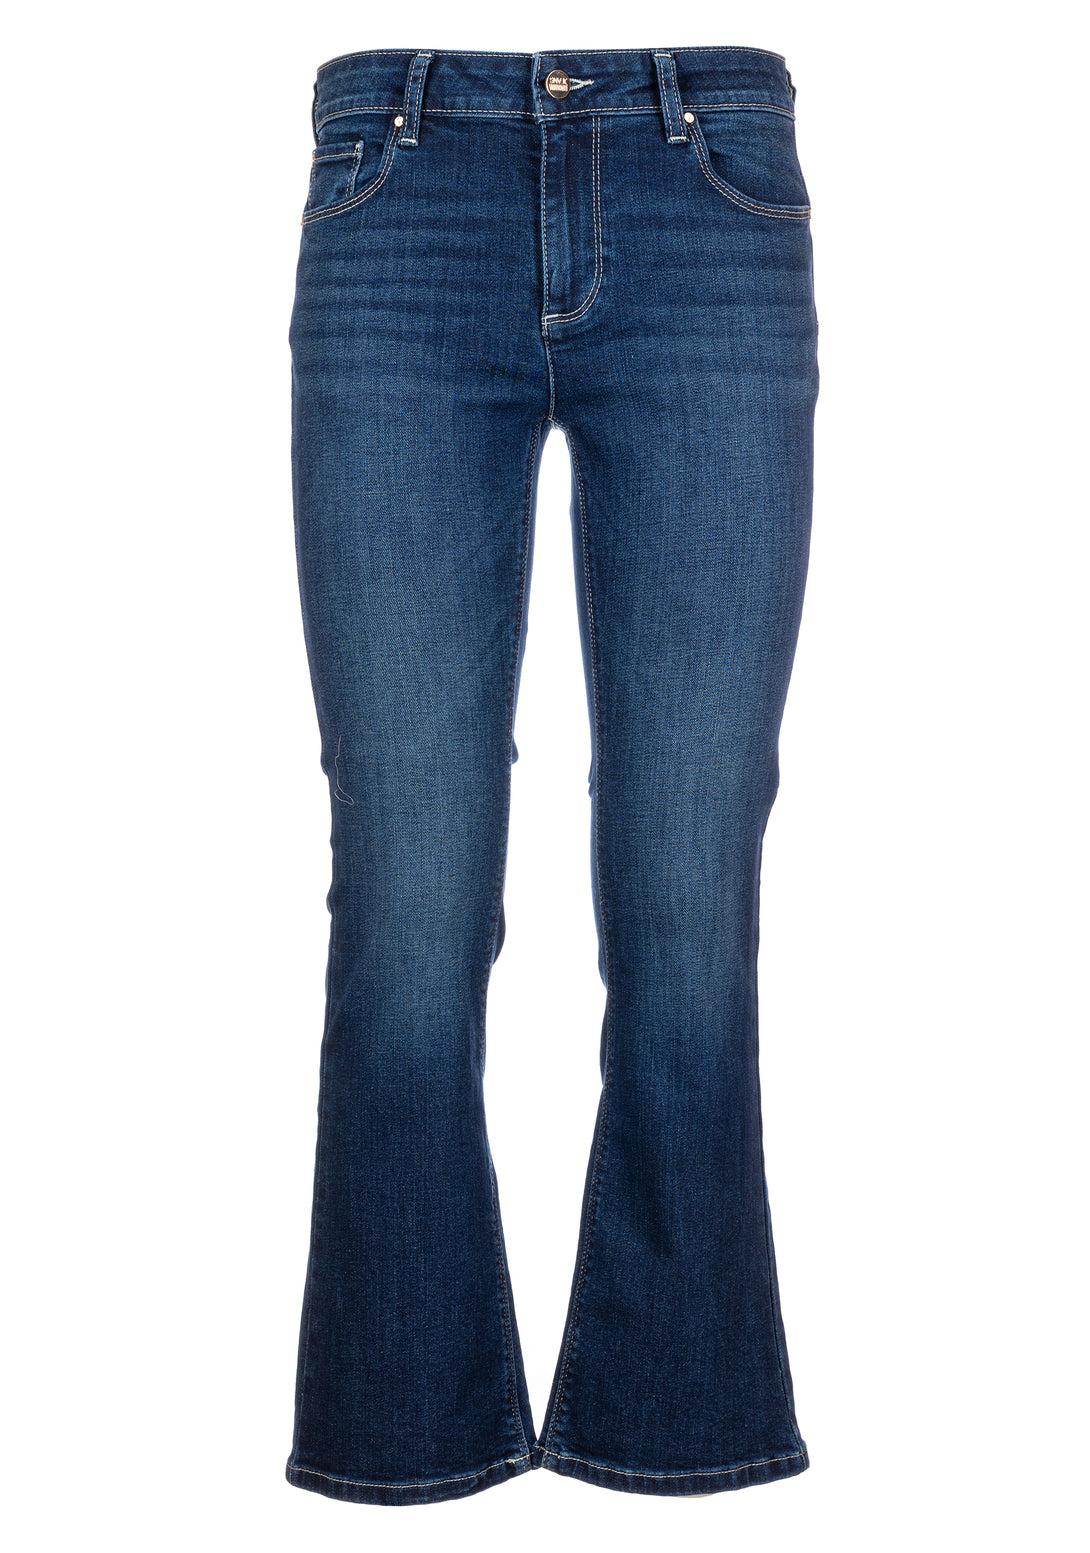 Jeans cropped flare with push up effect made in denim with middle wash